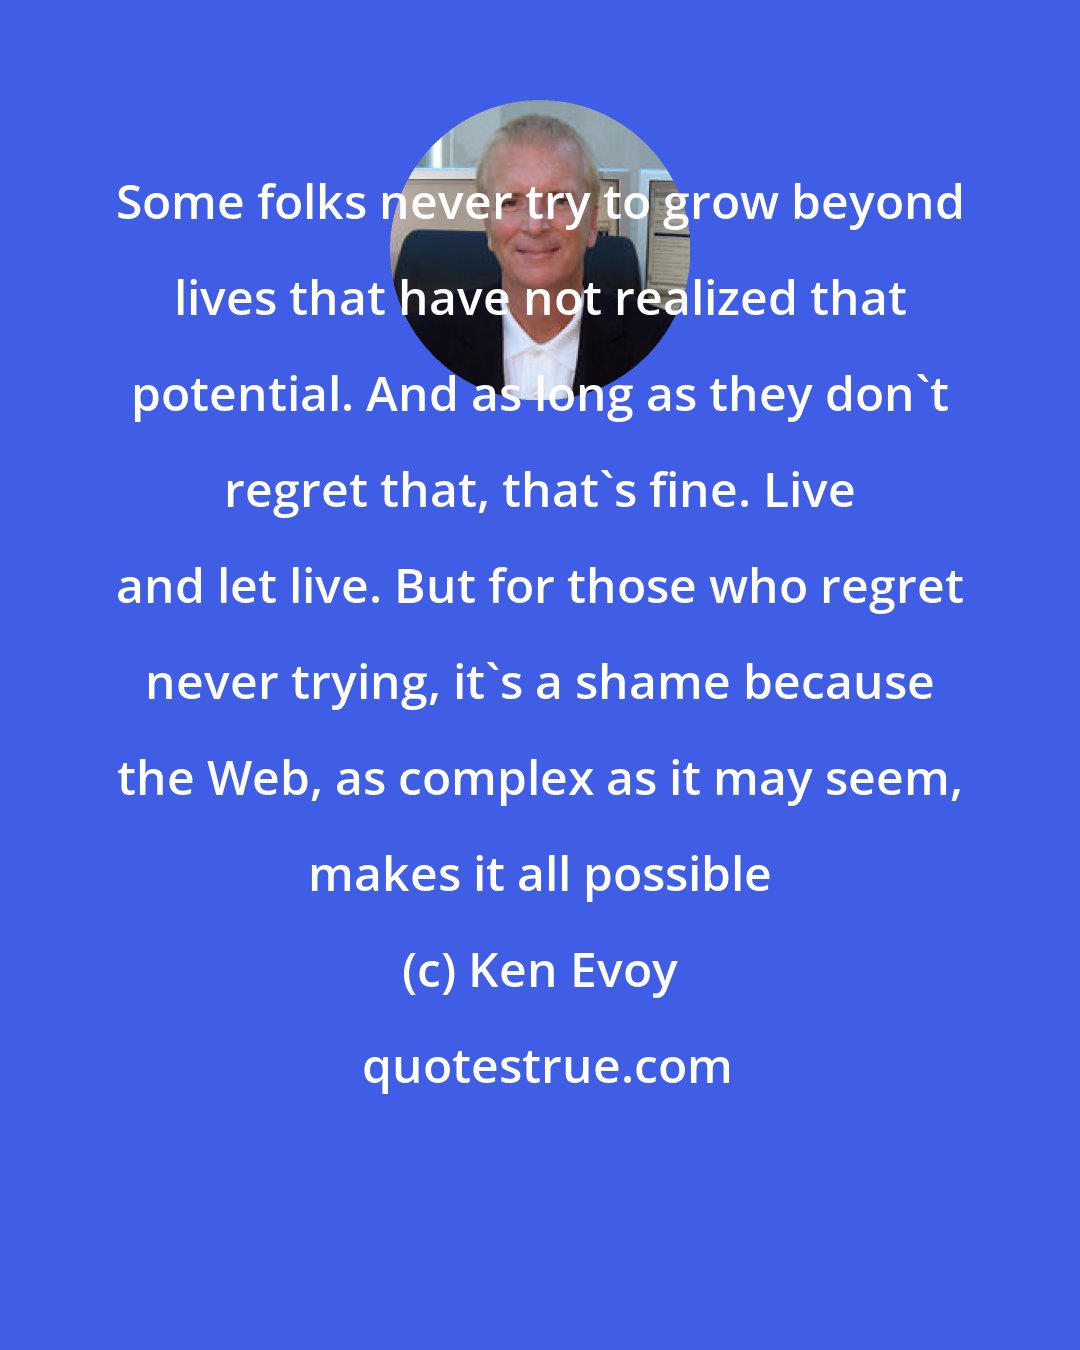 Ken Evoy: Some folks never try to grow beyond lives that have not realized that potential. And as long as they don't regret that, that's fine. Live and let live. But for those who regret never trying, it's a shame because the Web, as complex as it may seem, makes it all possible